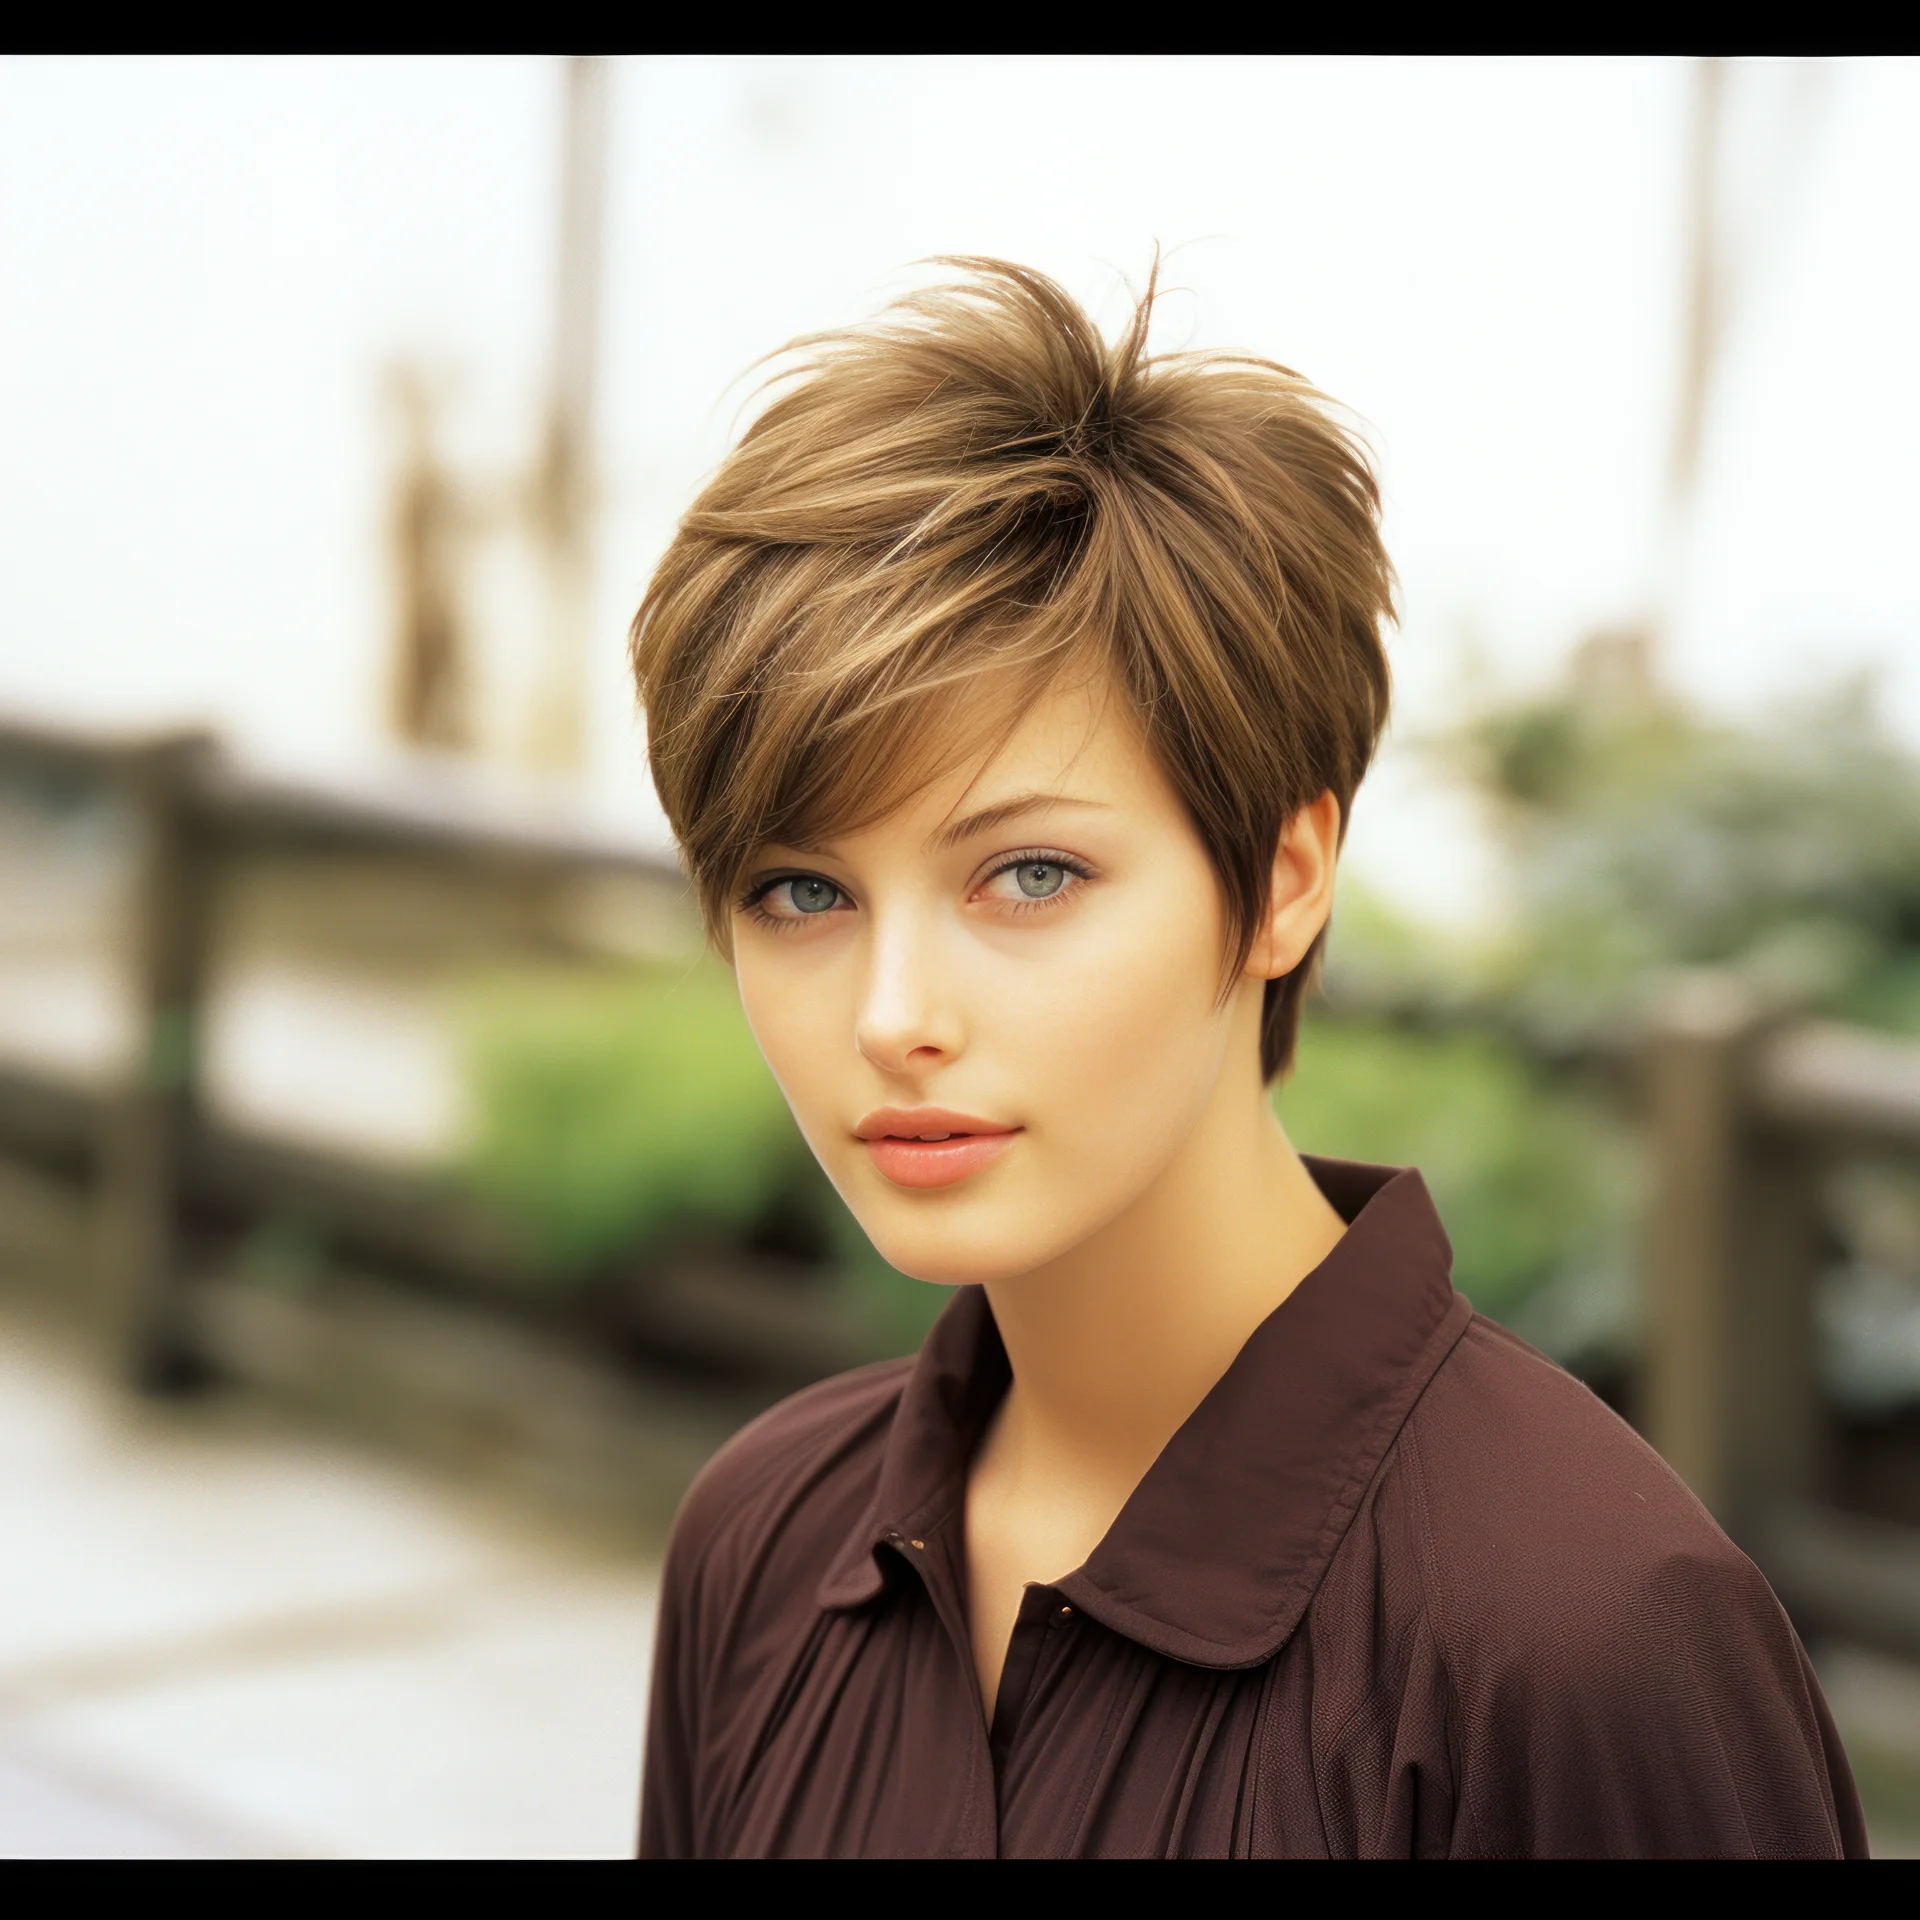 Short Brown Layered Crop Hairstyles For Women -1